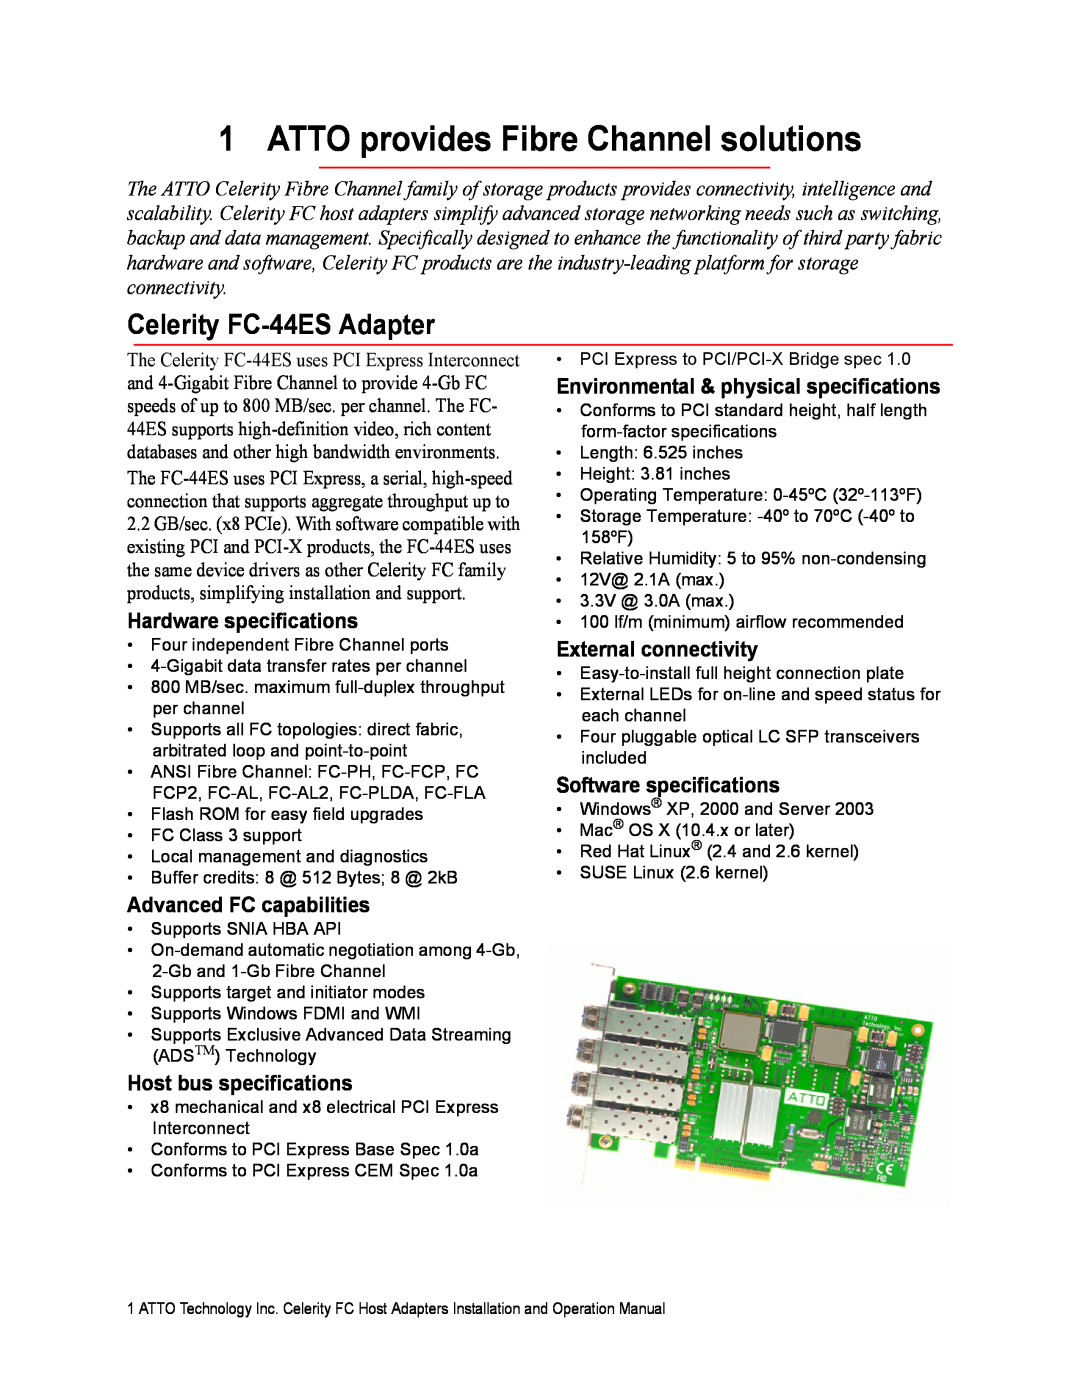 ATTO Technology FC-44ES 4-Gb ATTO provides Fibre Channel solutions, Celerity FC-44ES Adapter, Hardware specifications 